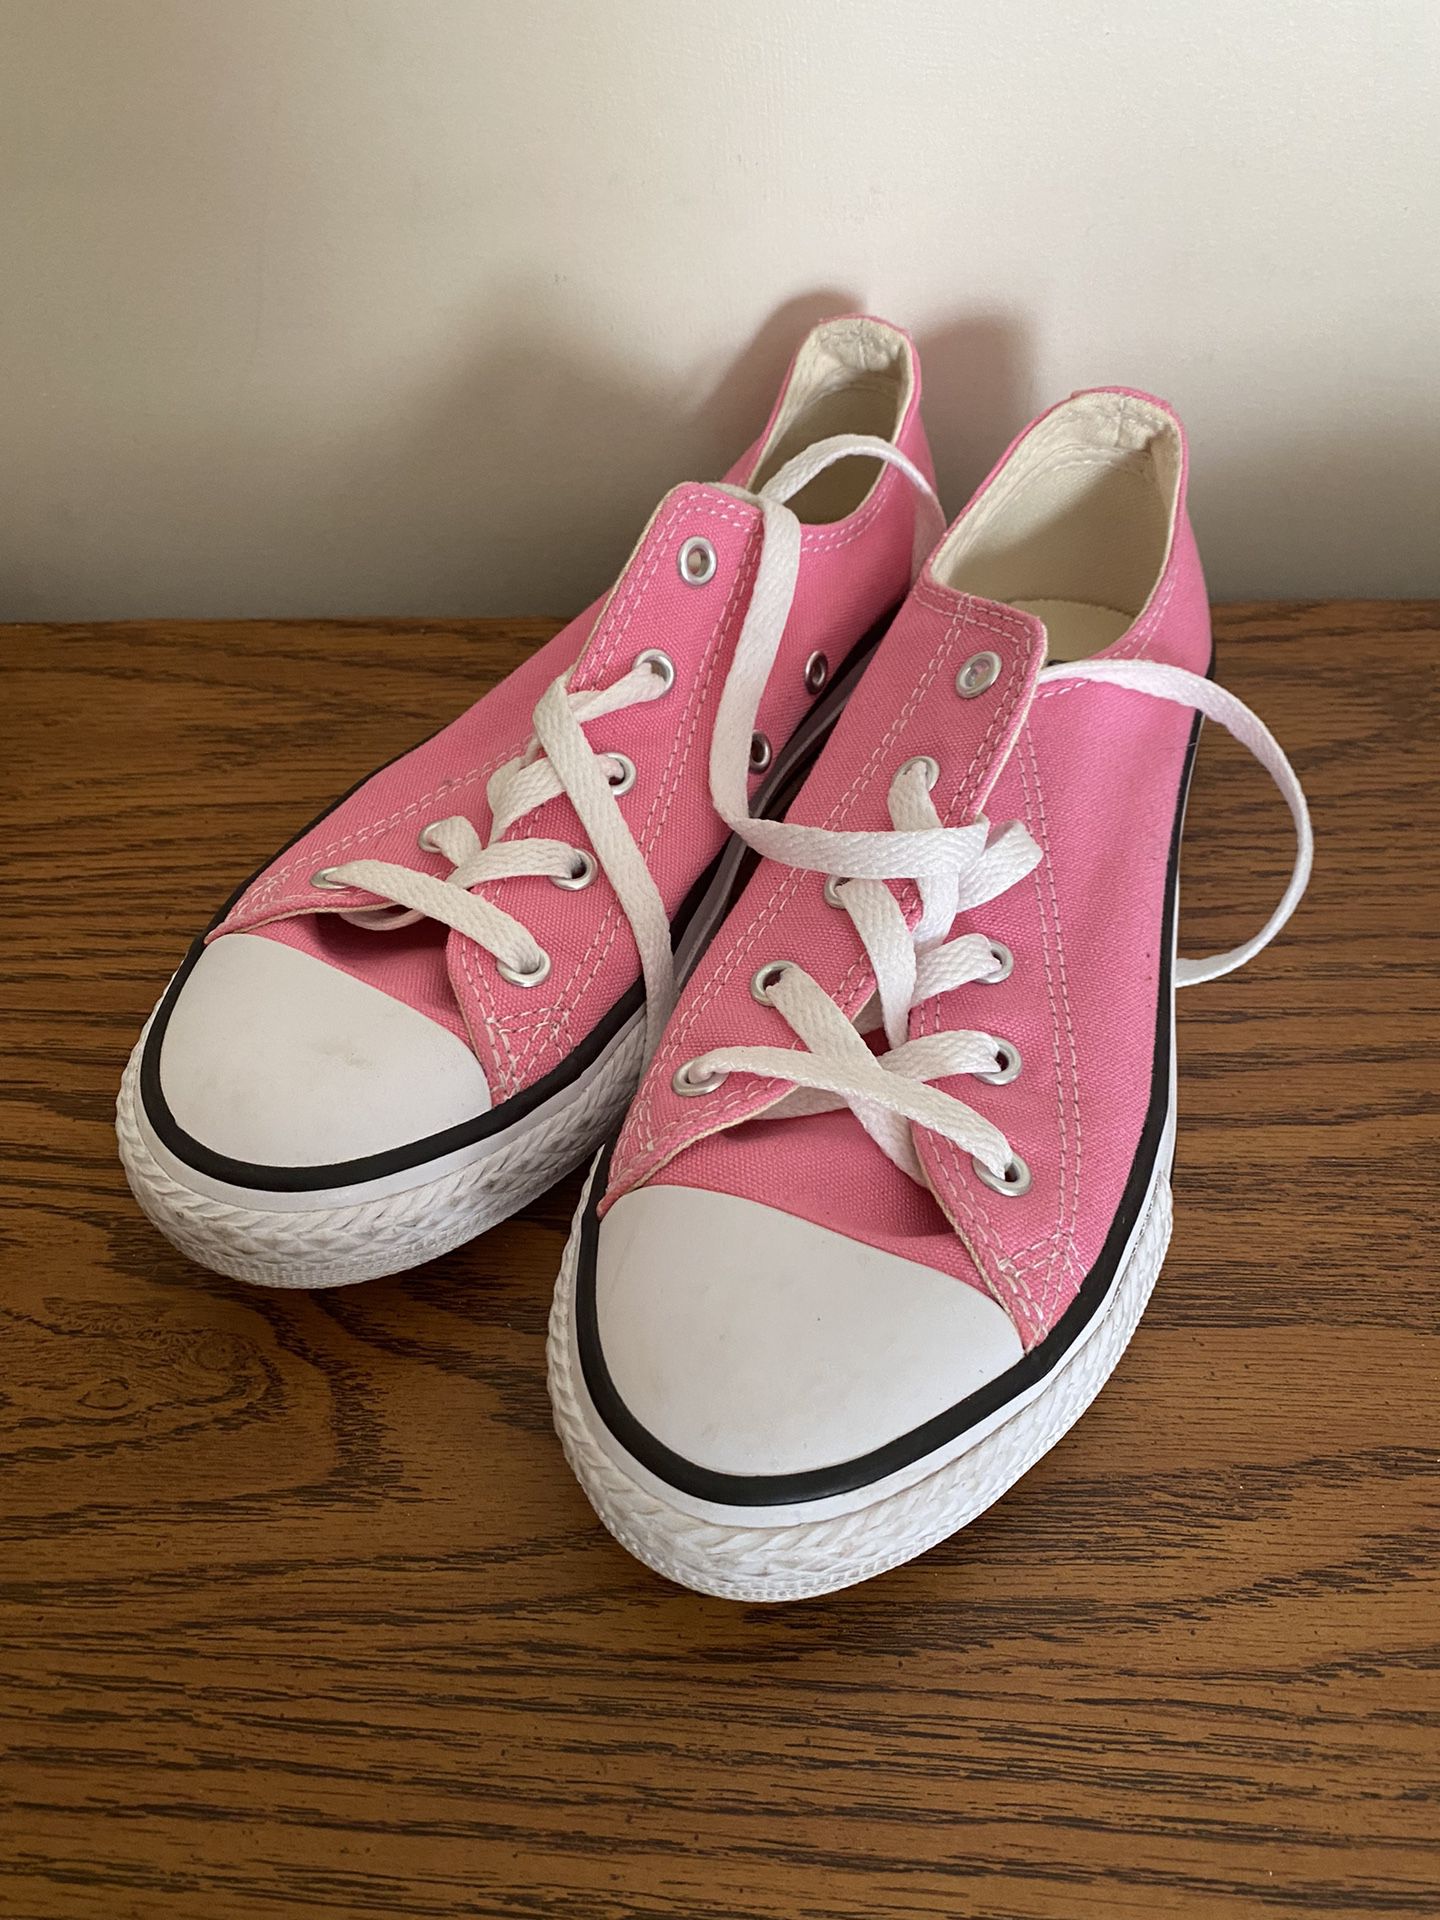 Brand New Women Converse All Star Sneakers Size 3. 